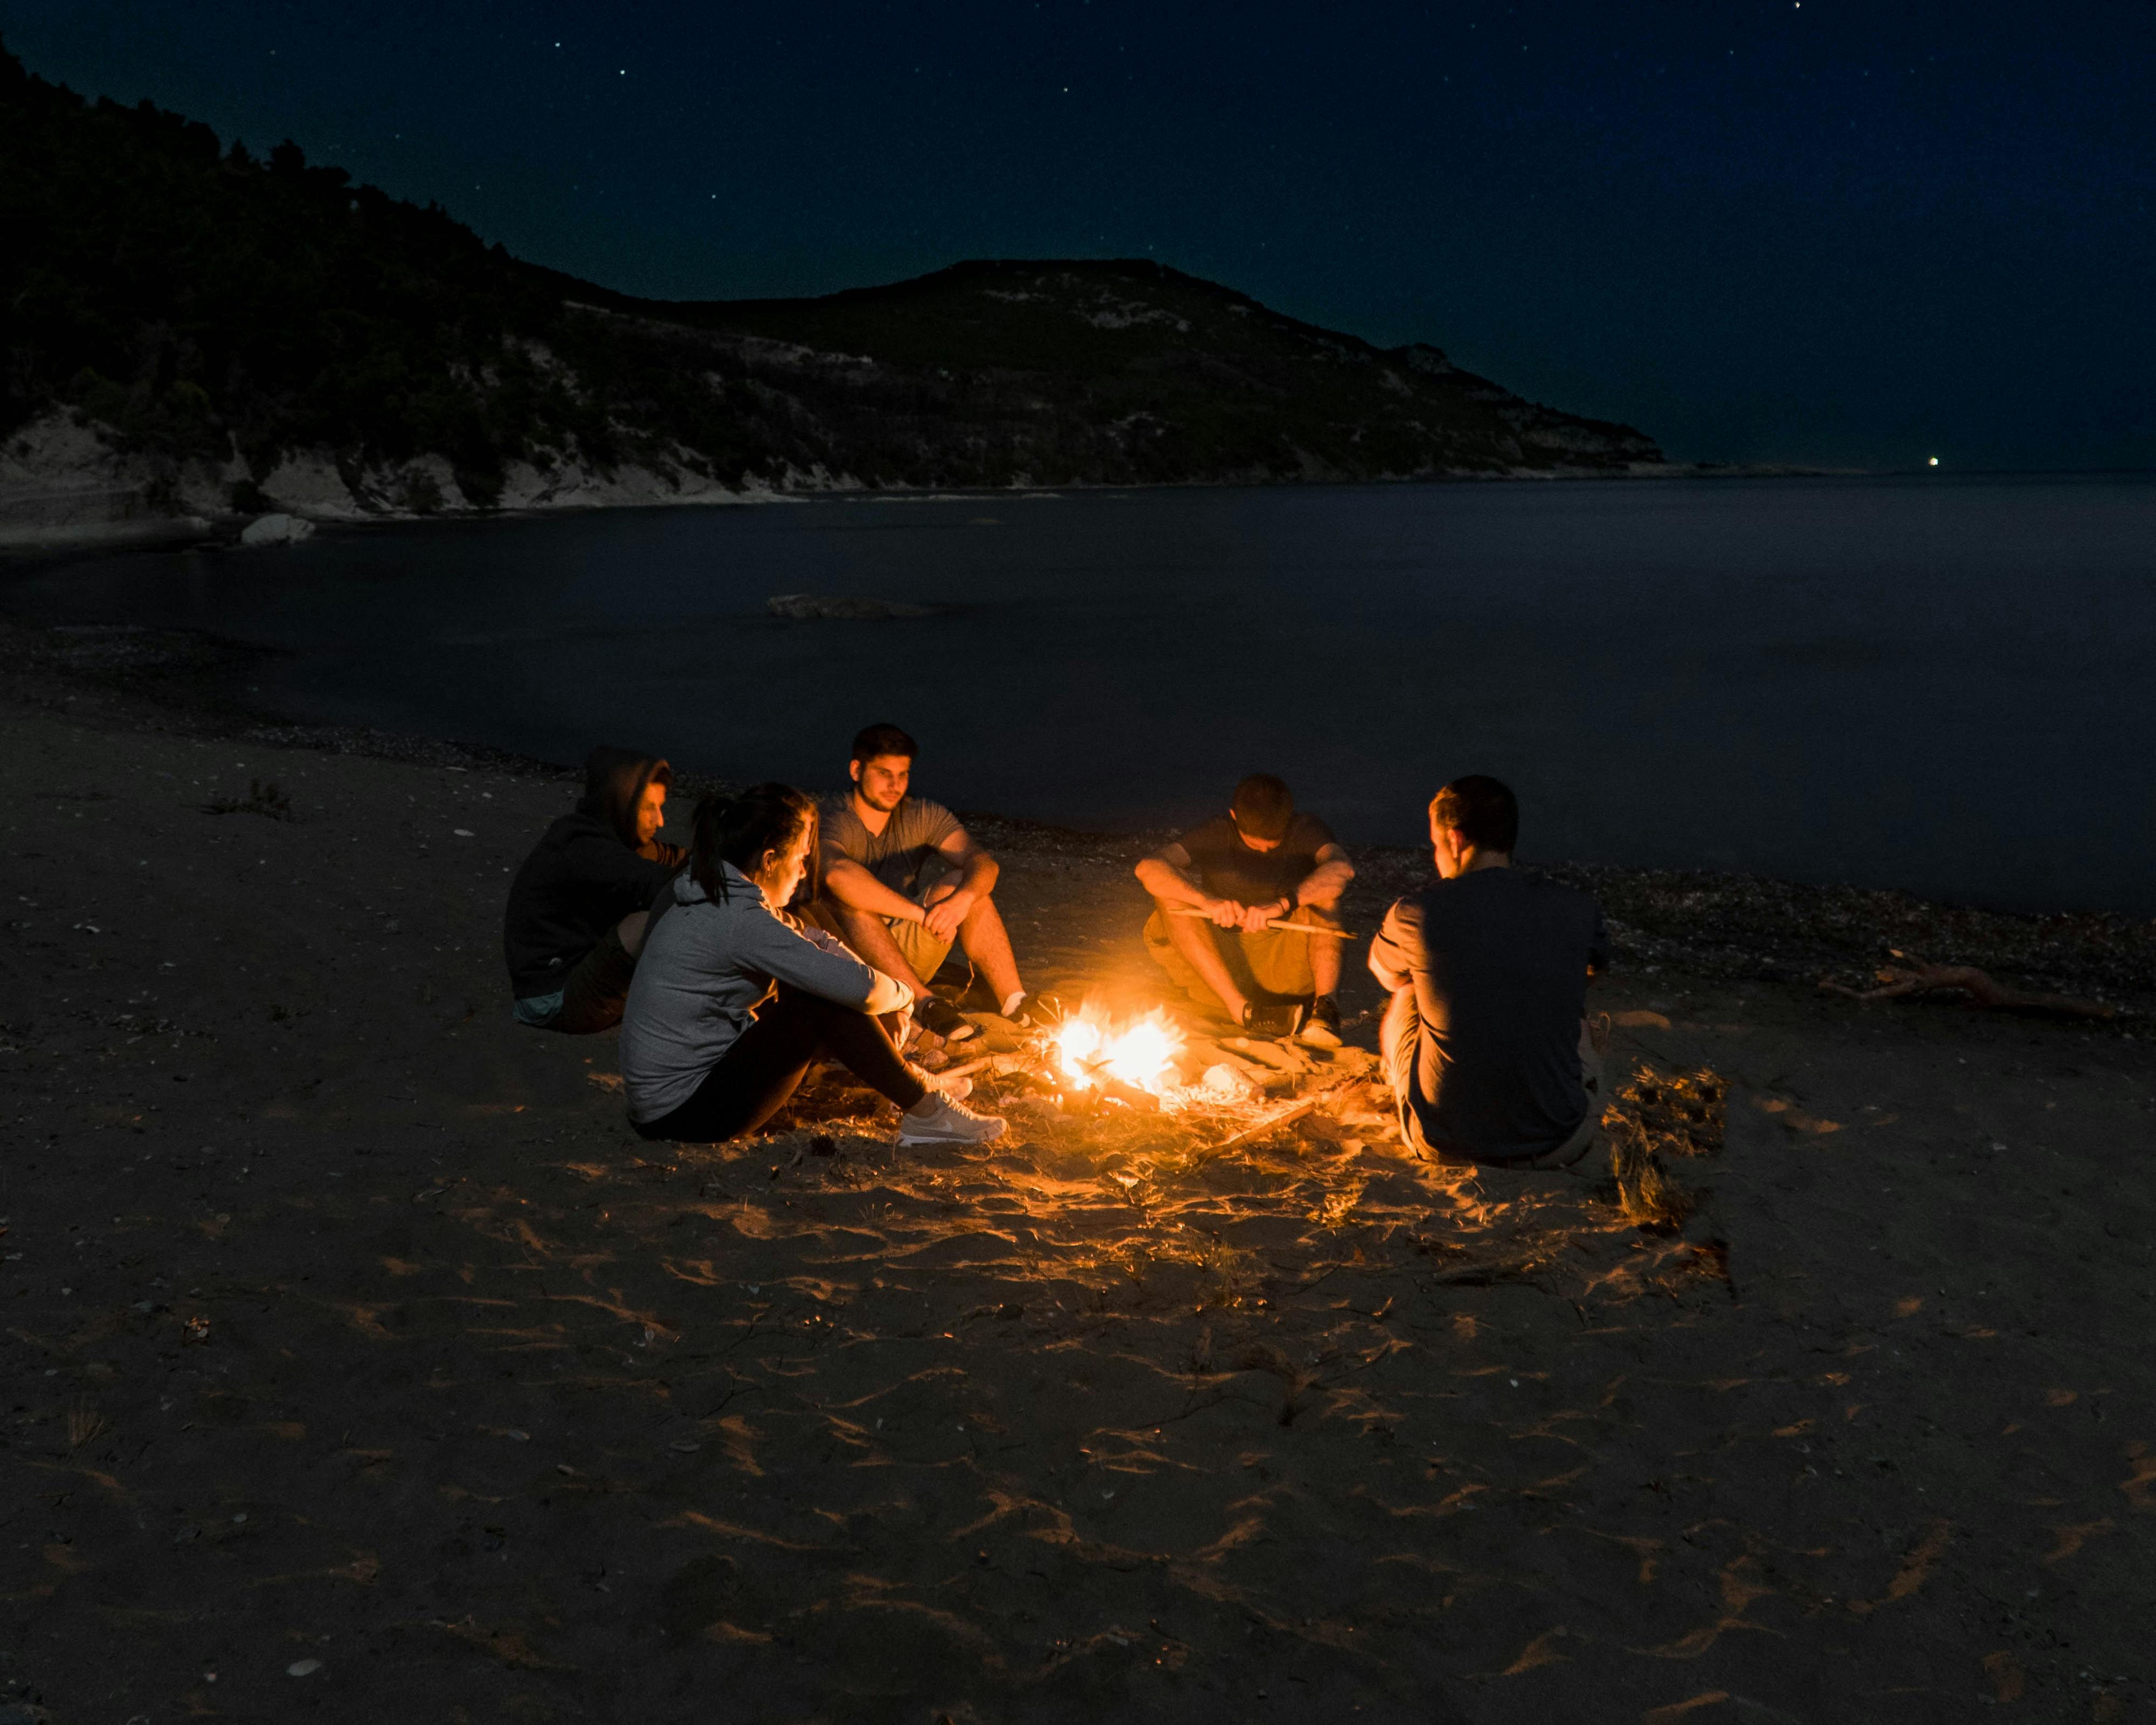 A group of people sit around a campfire on a beach at night